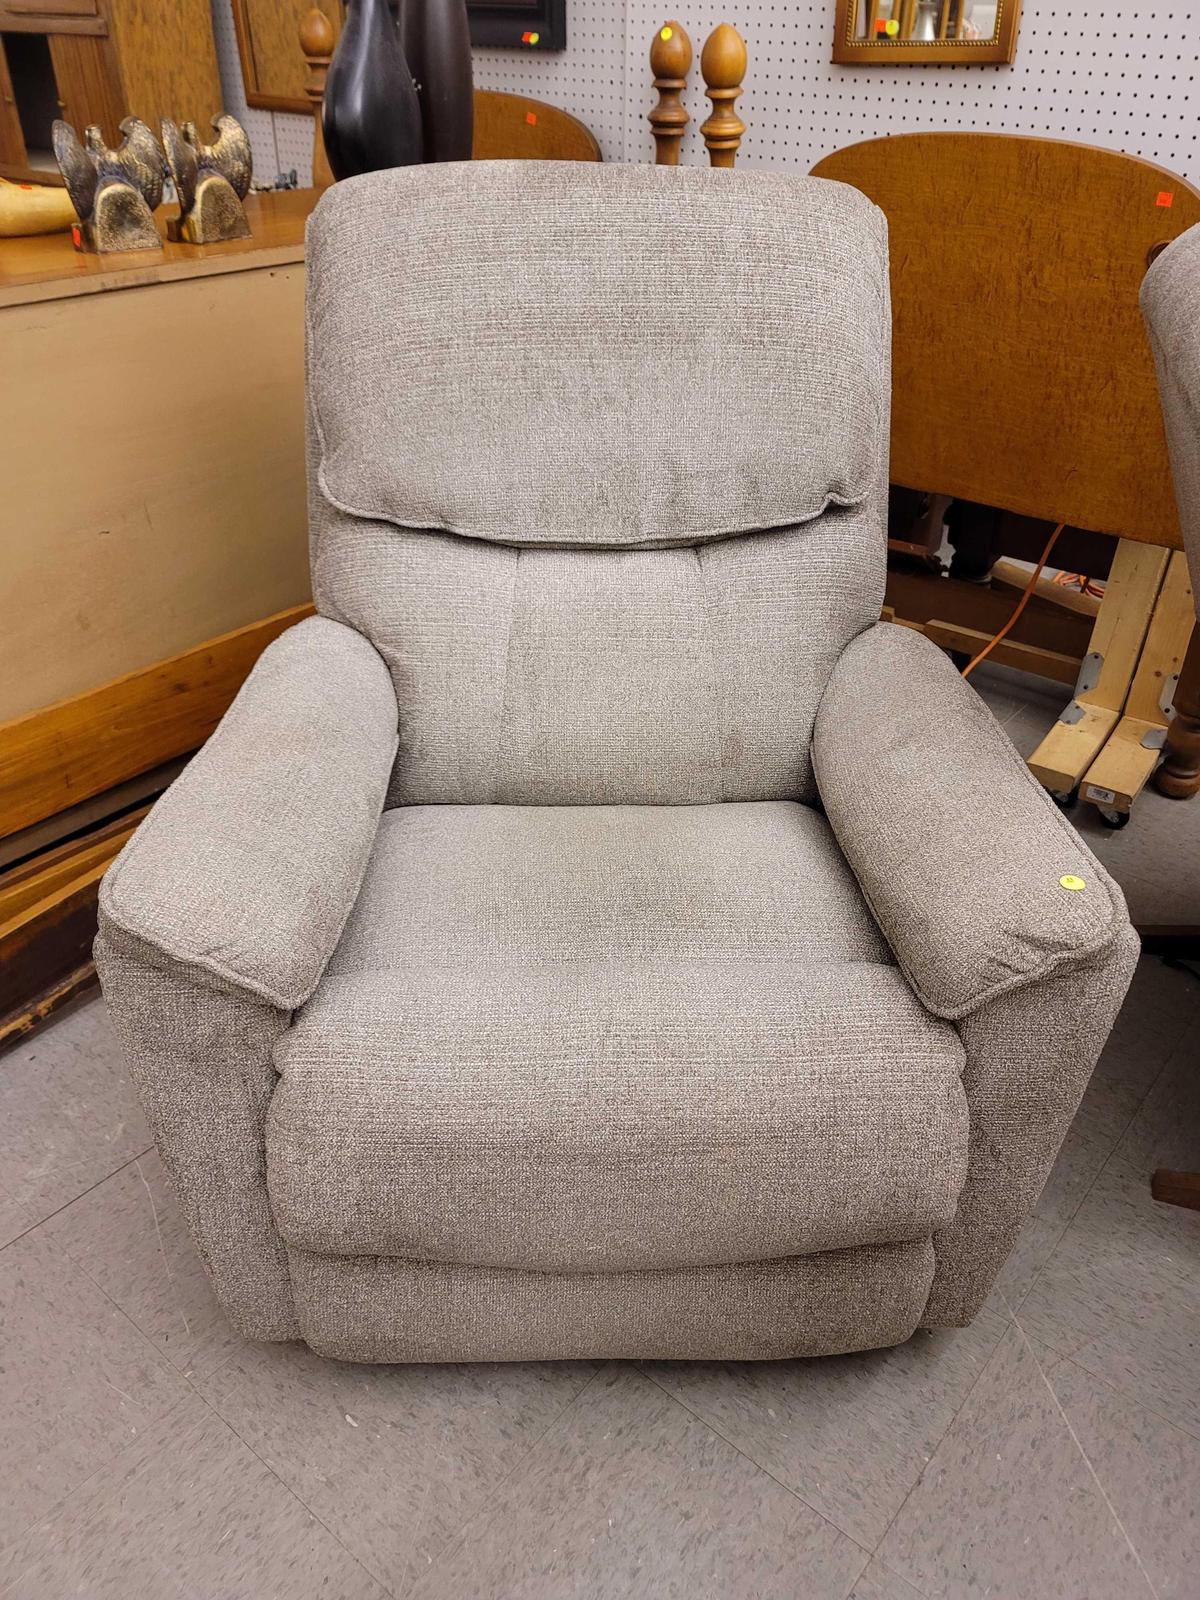 (R1) LA-Z-BOY JAMES POWER ROCKING RECLINER WITH HEAD REST & LUMBAR SUPPORT. GREYISH WHITE